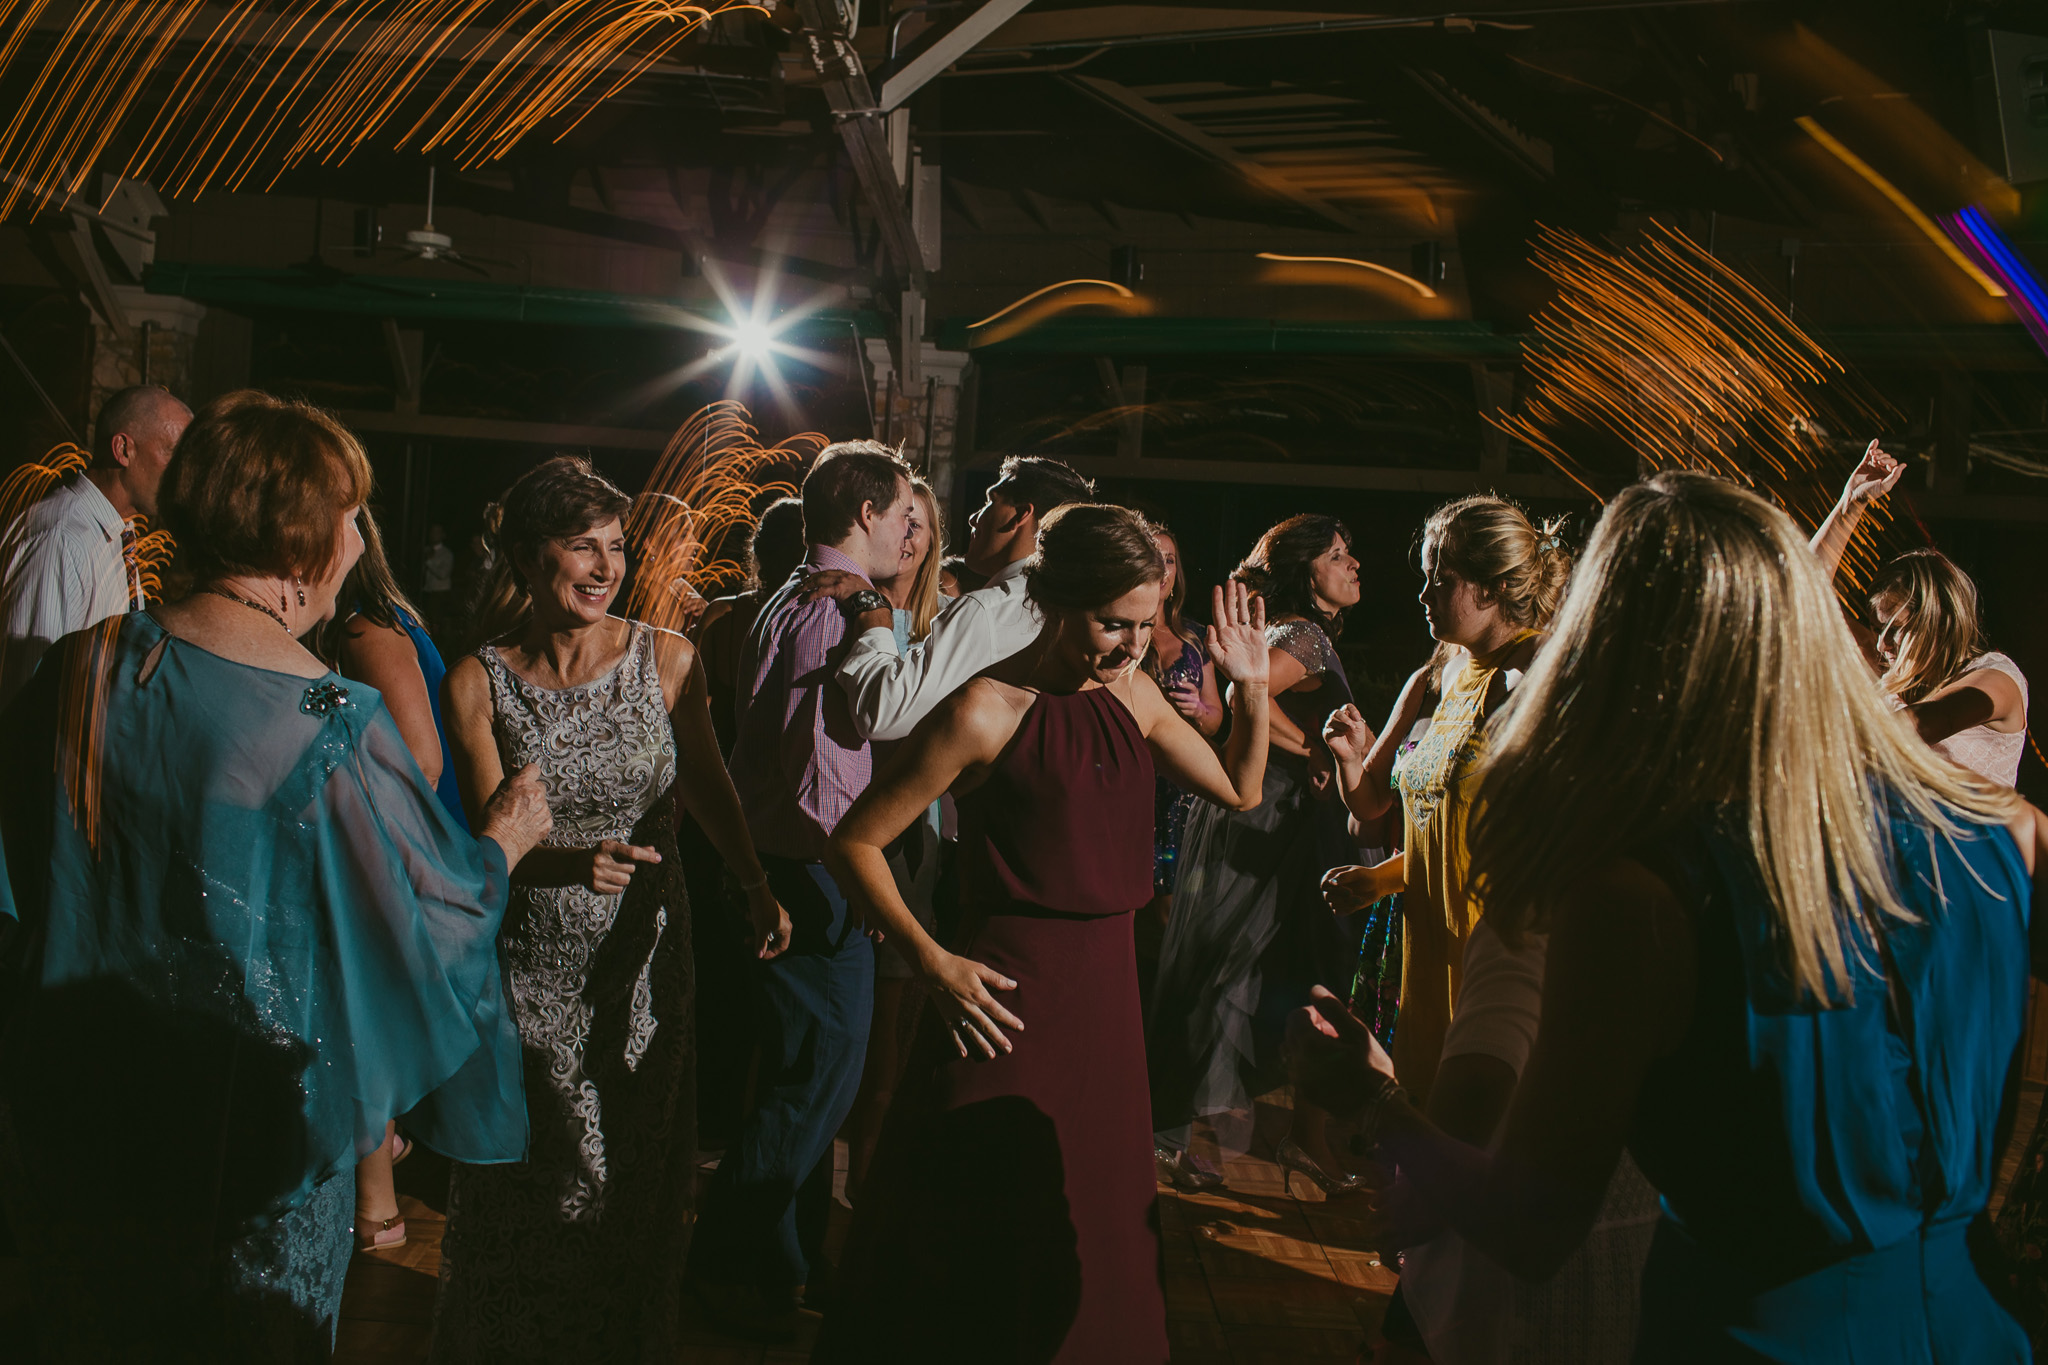 guests dance the night away at this crest pavilion wedding